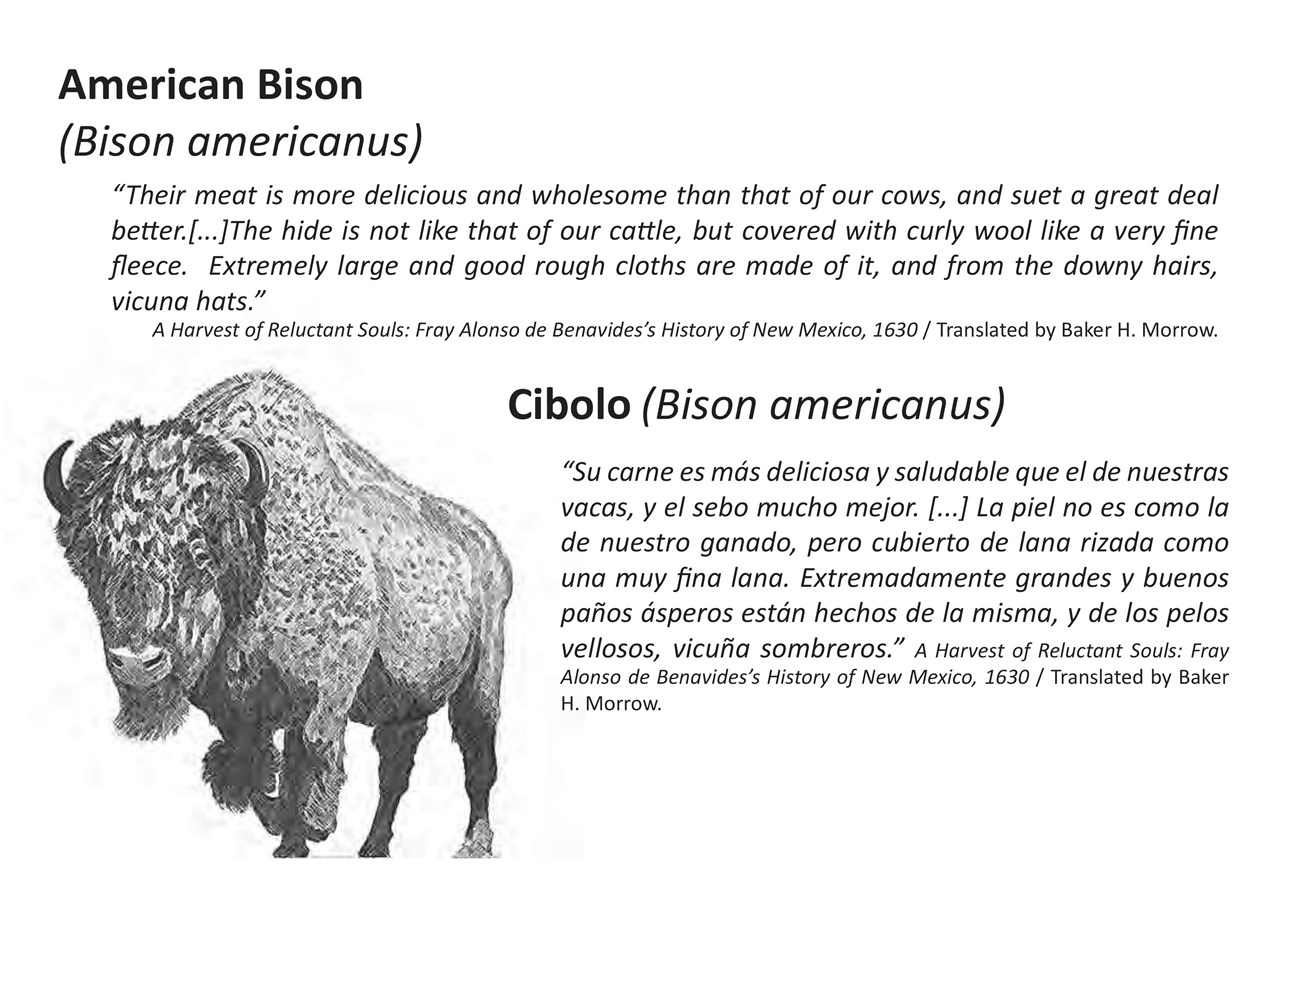 10 inches by 8 inches metal exhibit sign. Giclee printed aluminum markers staked into ground along upper sidewalk (high road) next to the school and playground. Image of an American Bison to the left of text in English.